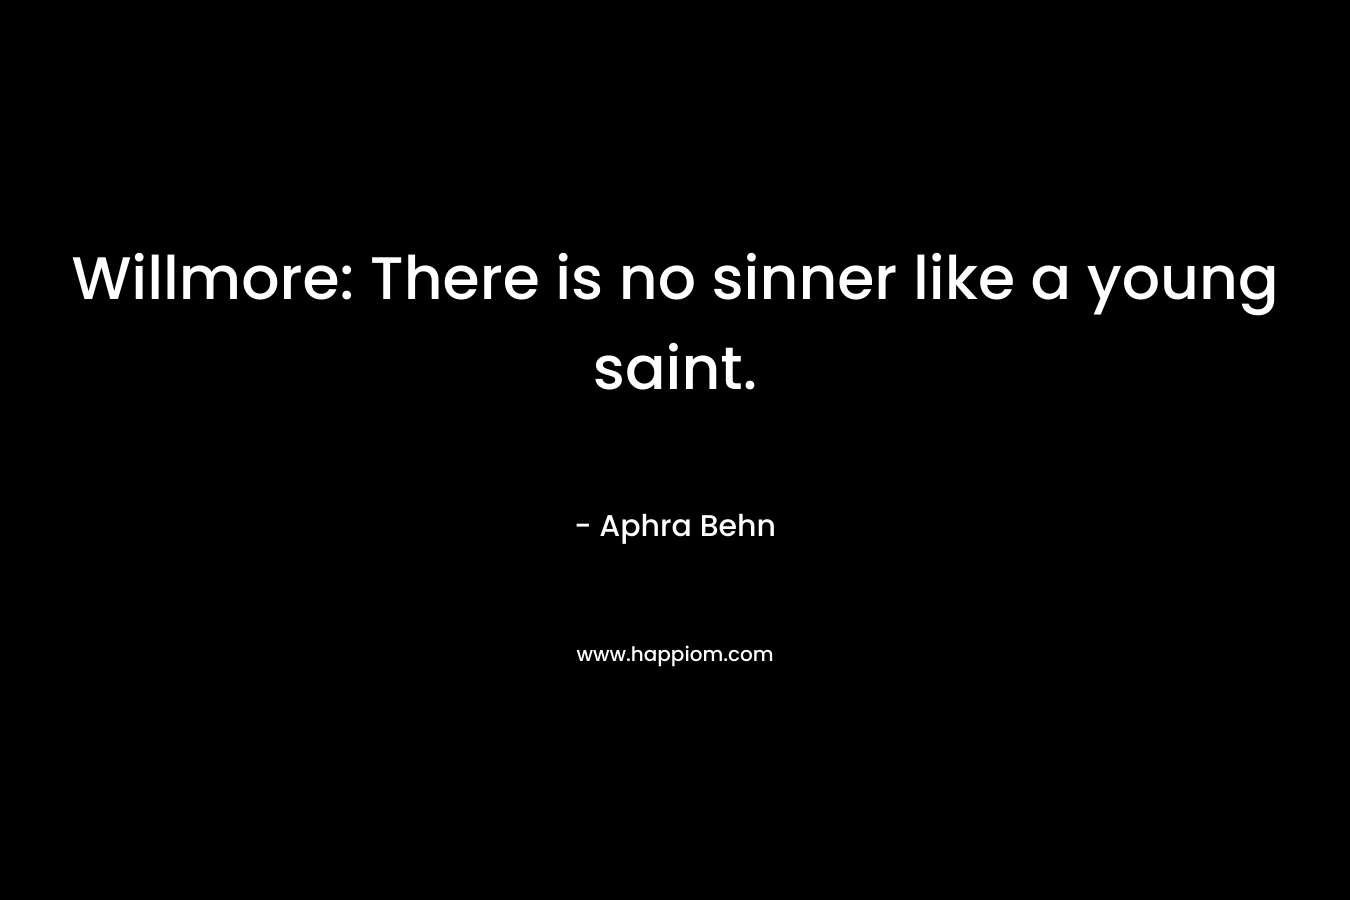 Willmore: There is no sinner like a young saint. – Aphra Behn